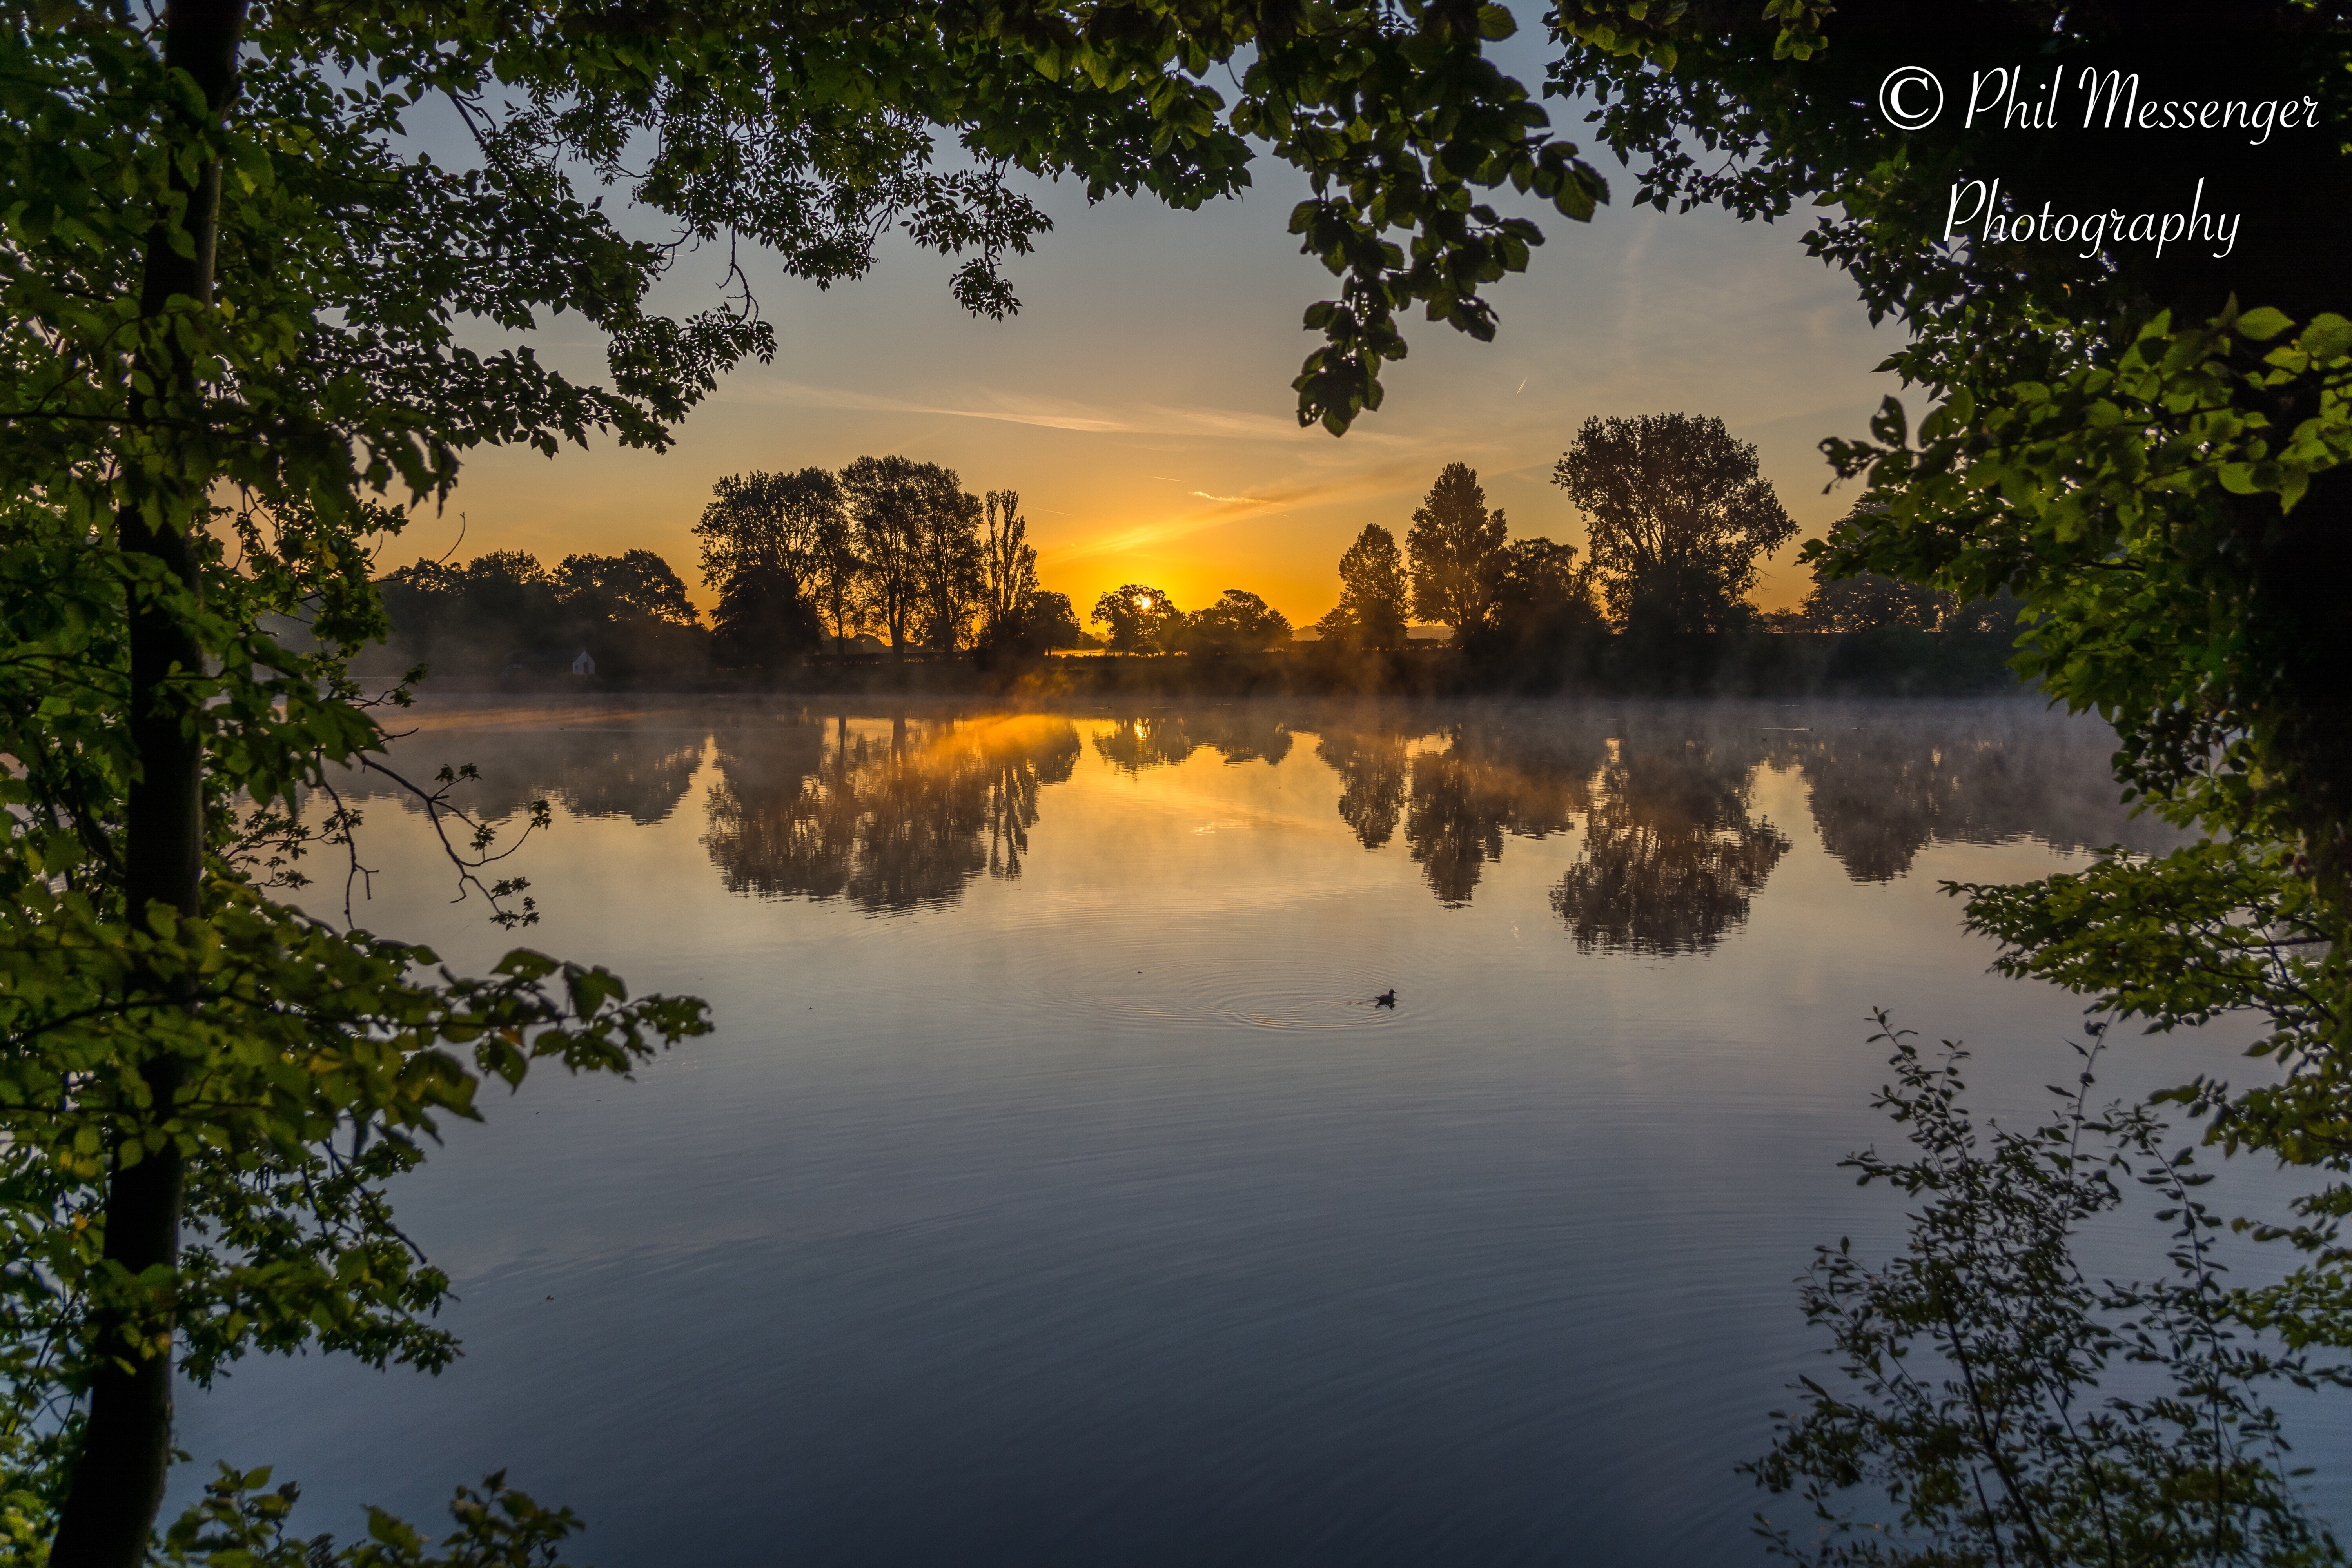 A beautiful sunrise framed at Coate Water, Swindon, Wiltshire.